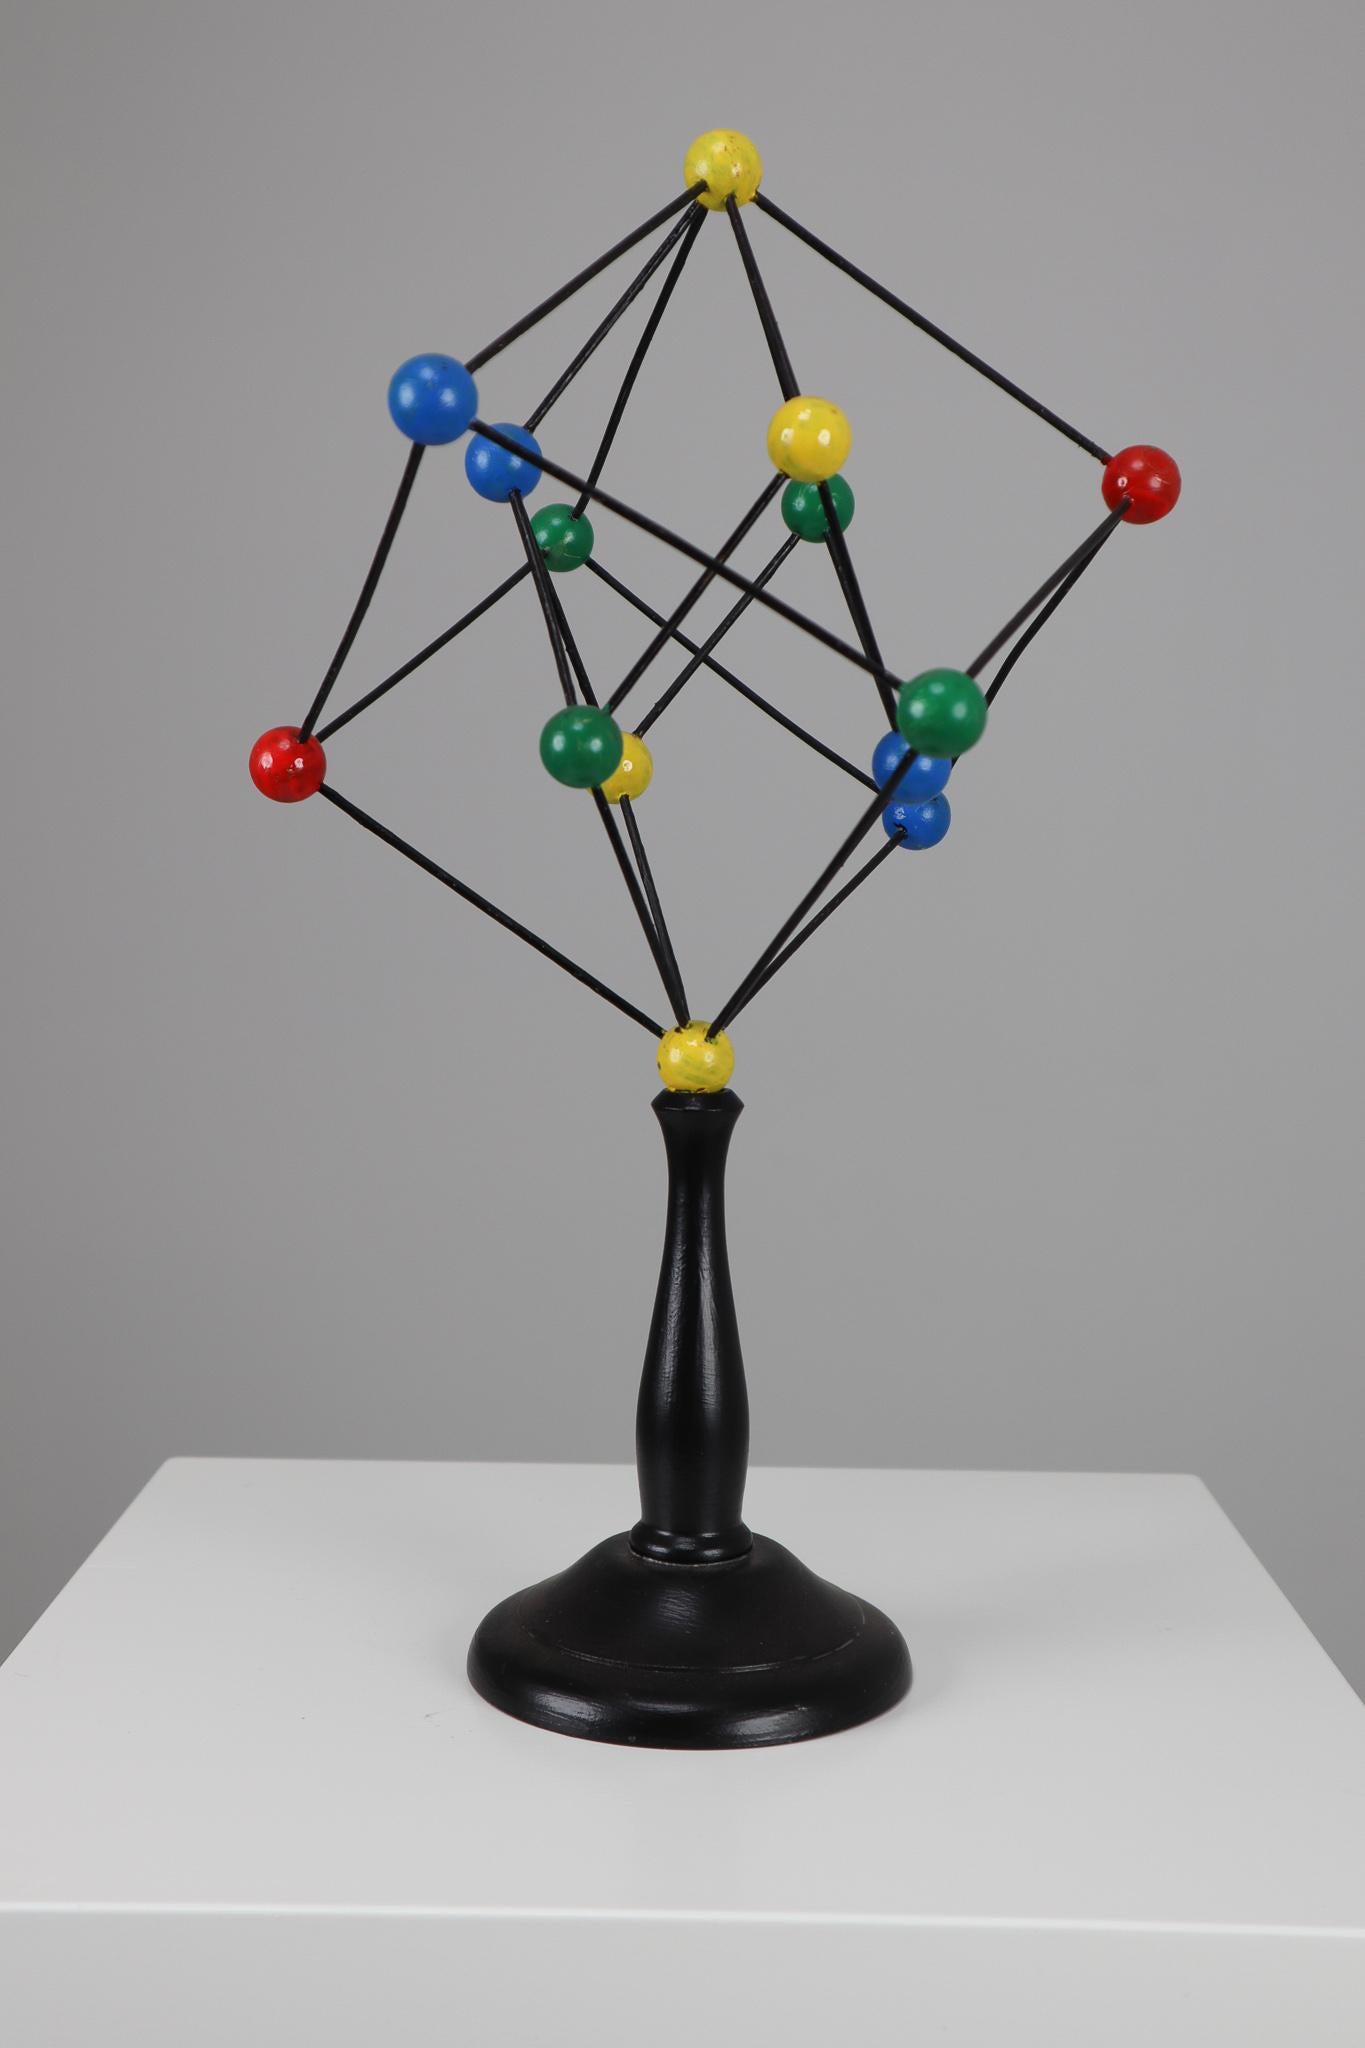 Mid-century scientific crystal model from Czechoslovakia from the 1950s. Made for educational reasons, used for classroom demonstration and study. In good condition with signs of age and patina.